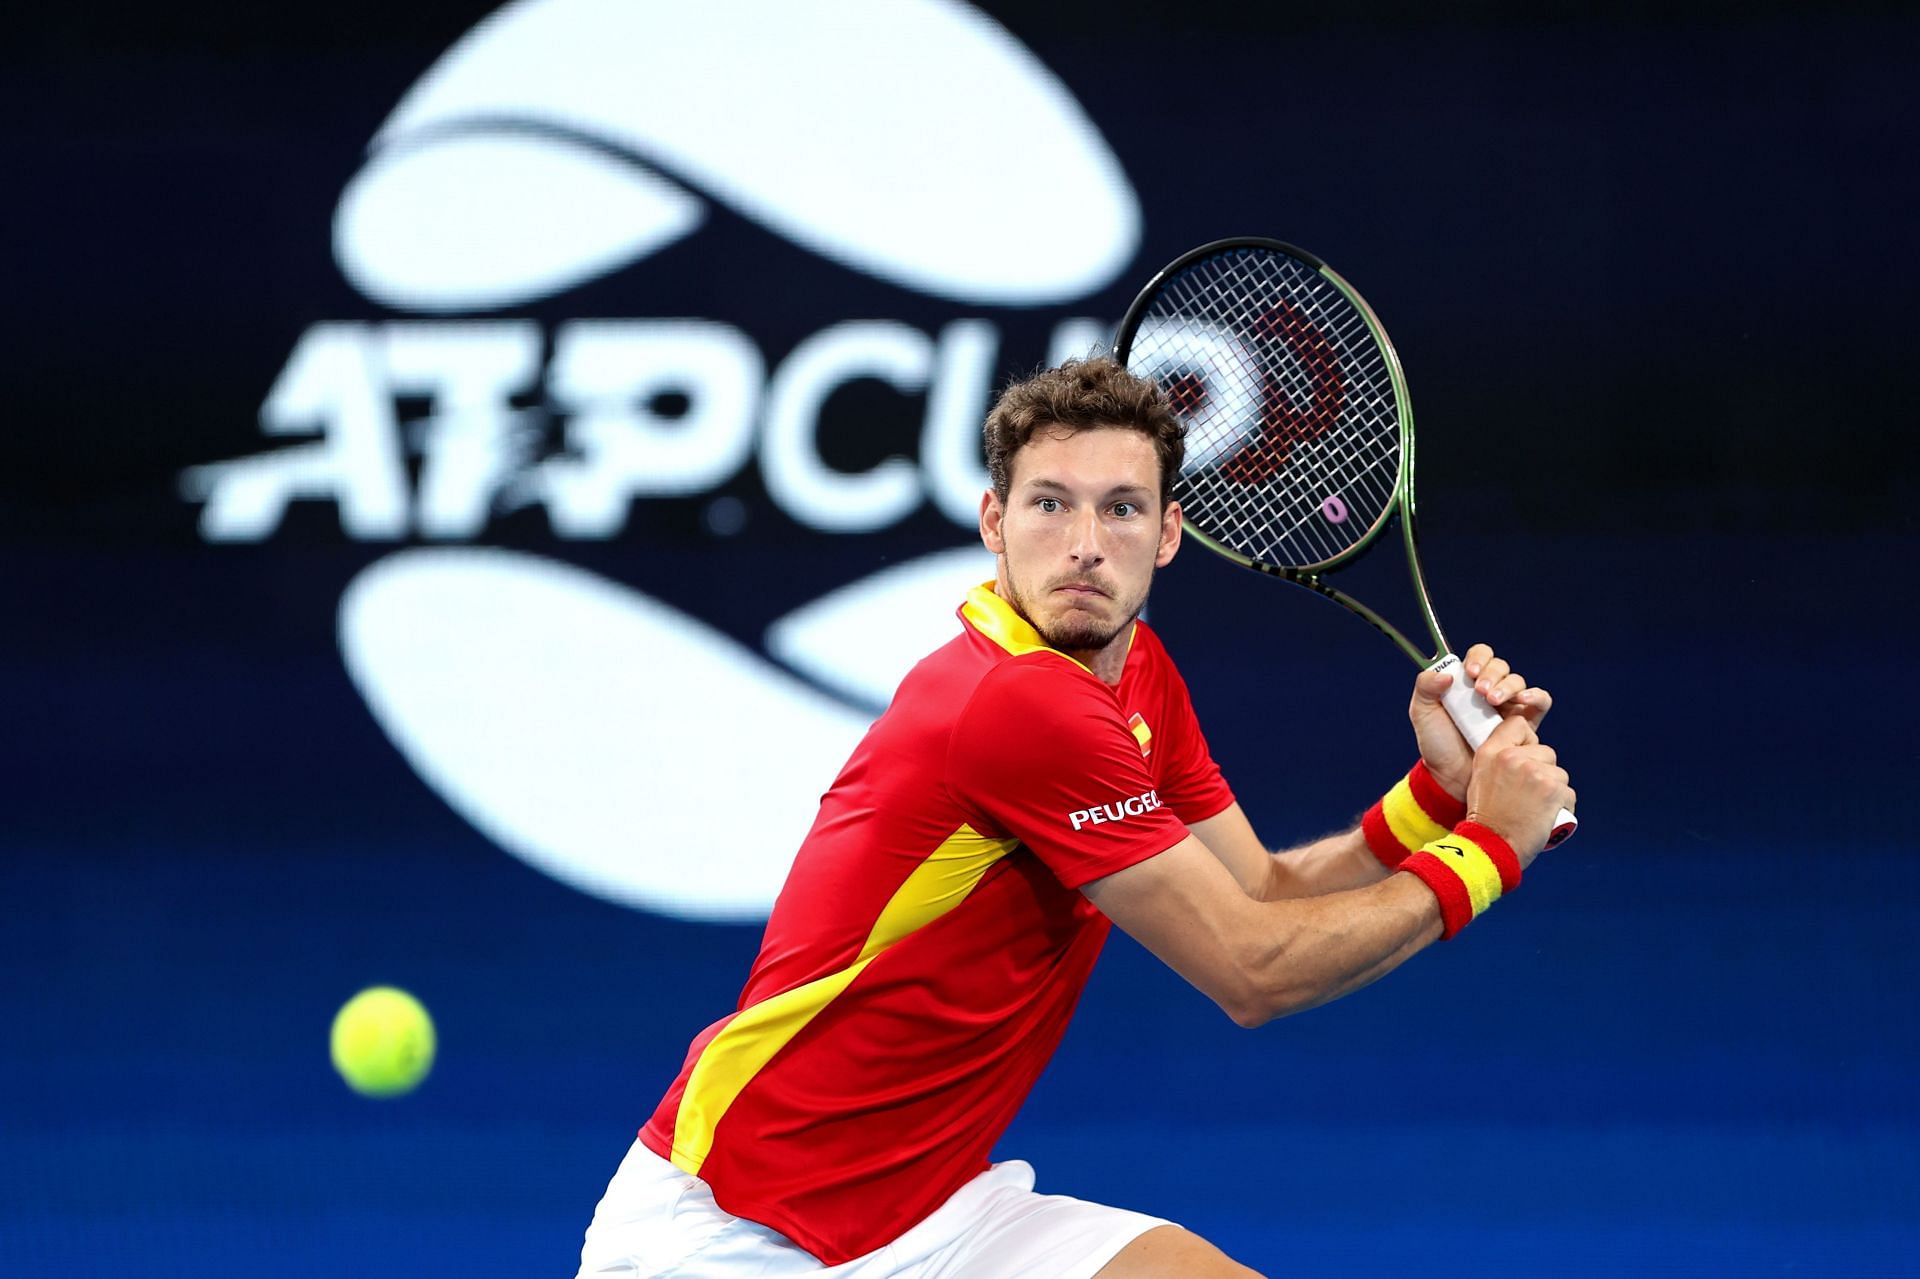 Pablo Carreno Busta is a former finalist at the Rio Open